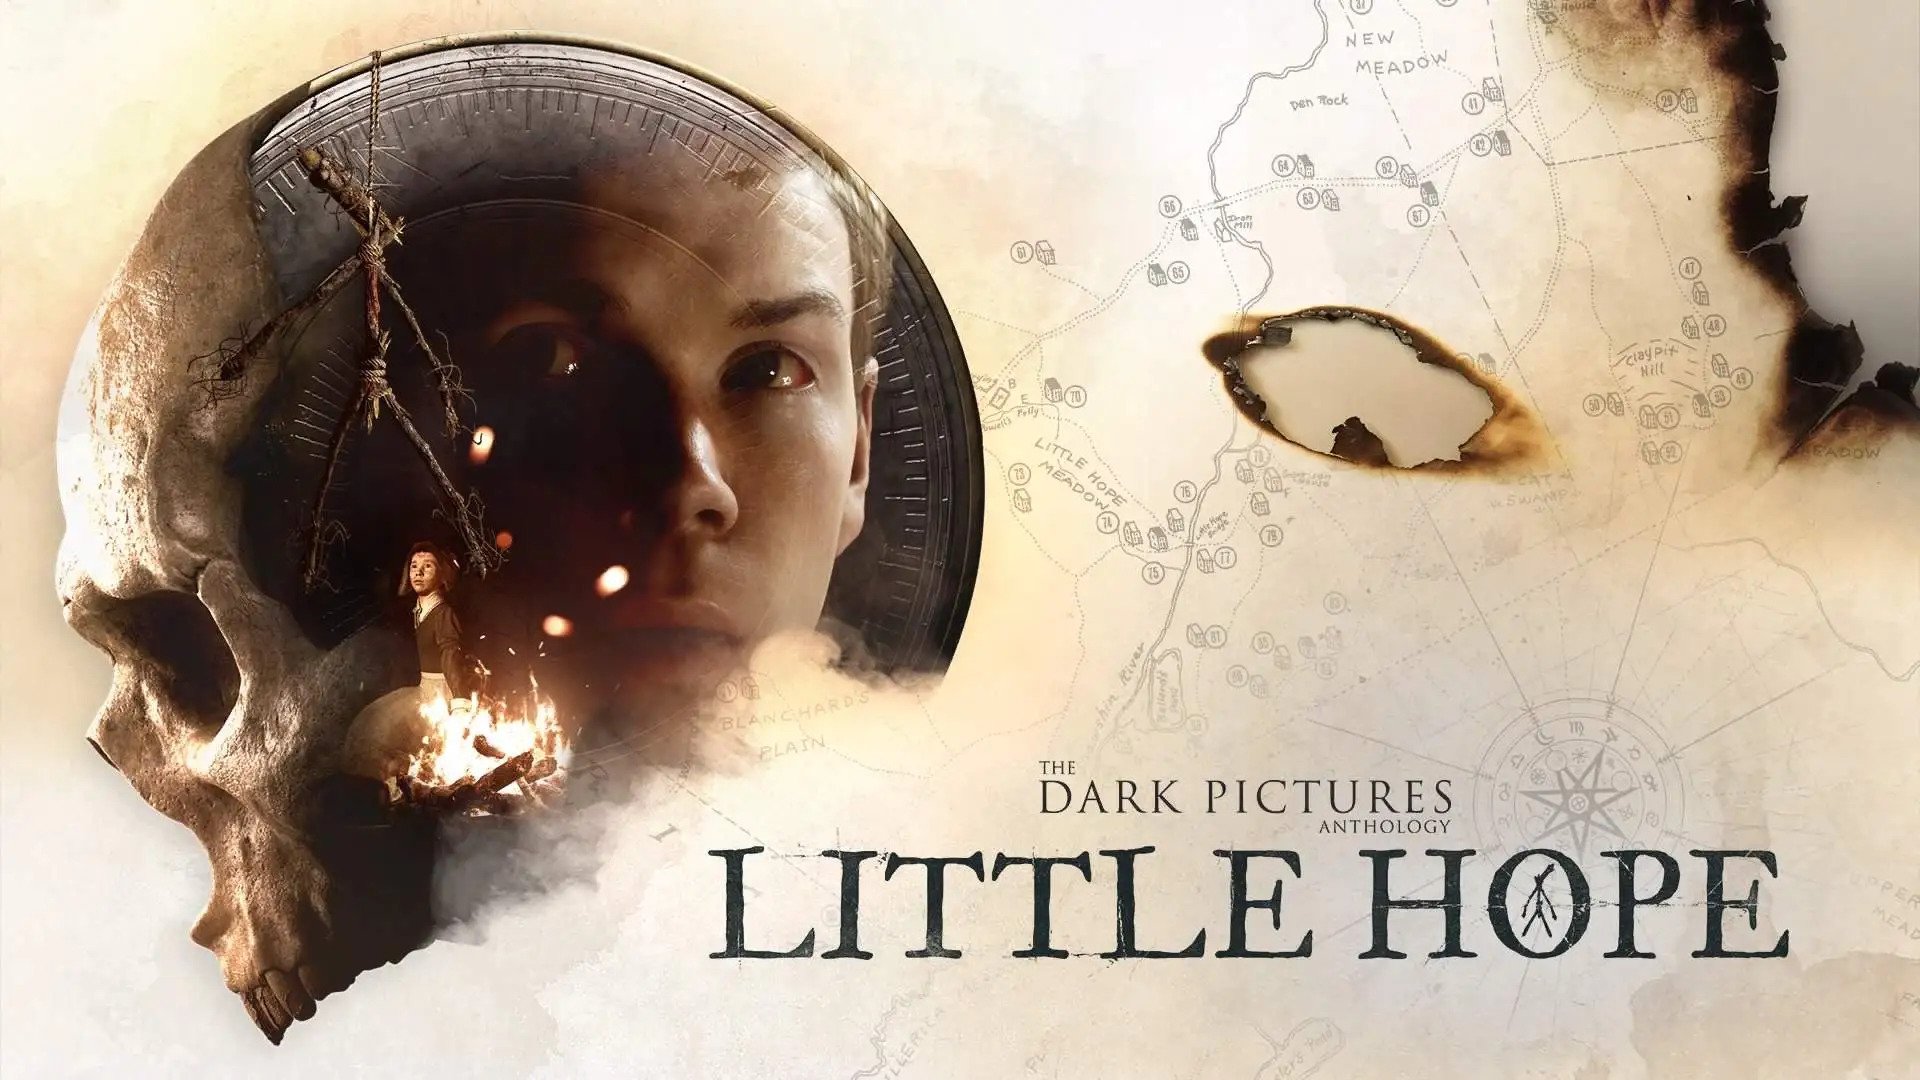 The Dark Pictures Anthology: Little Hope Is Available Now For Nintendo Switch